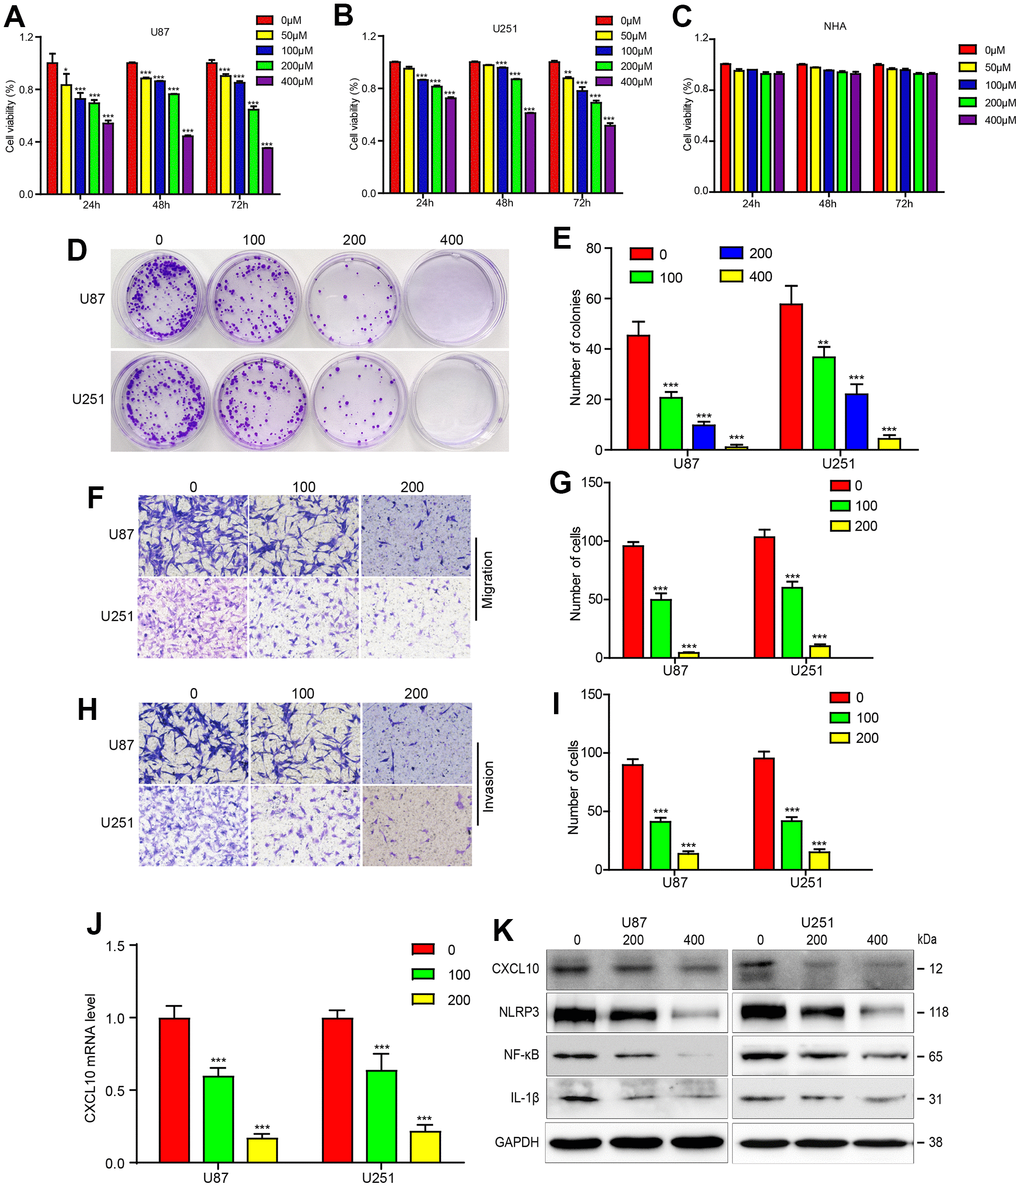 Calycosin suppressed GBM progression and downregulated CXCL10 pathway in U87 and U251 cells. (A–C) The CCK8 experiment were performed in U87, U251 and HNA cells with the different concentrations of calycosin. (D, E) Cell colony formation in glioblastoma cells with CA treatments as indicated dose. (F–I) U87 and U251 cells were treated with the indicated dose of CA for 24 hours, and transwell assay was applied to examine the migration and invasion. (J) RT-PCR was applied to detect the mRNA level after indicated dose of CA. (K) U87 and U251 cells were performed with the different dose of CA for 24 hours and western bolt was applied to detect the protein expression levels of CXCL10 pathway. *P